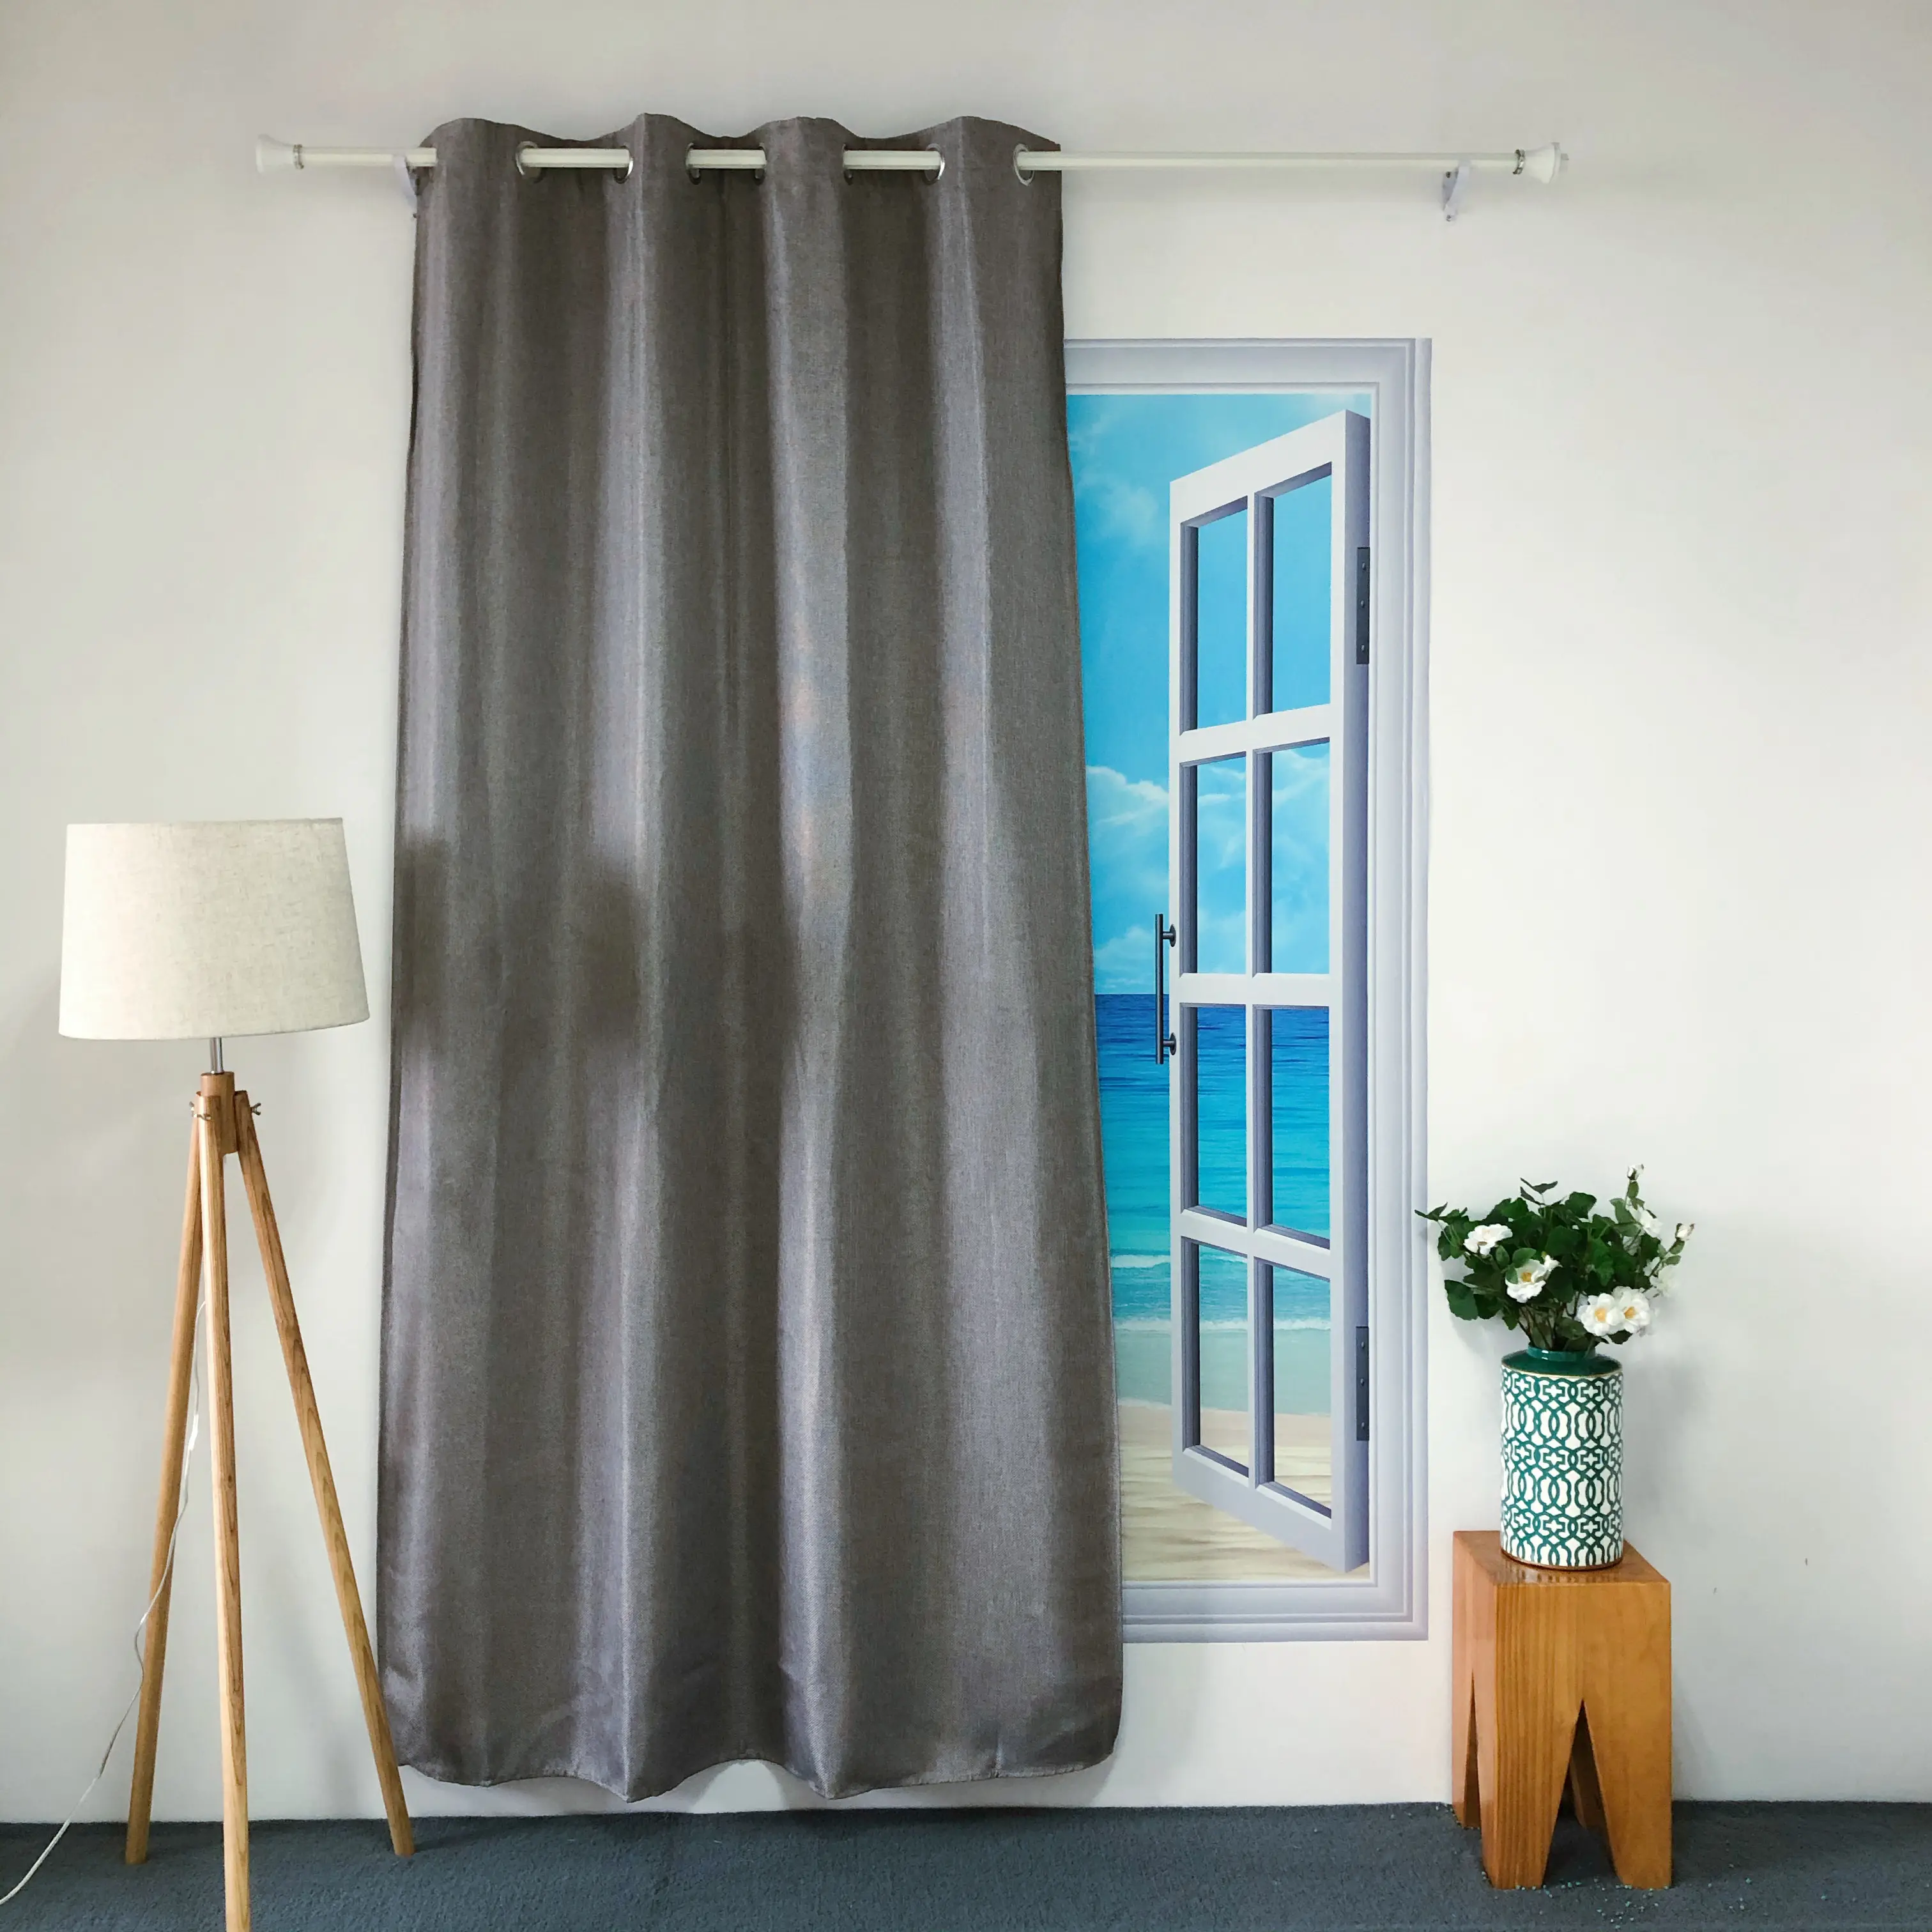 KEQIAO CHINA BK-10 GRAY NICE SIMPLE POLYESTER DESIGN POLYESTER PLAIN VOILE DOLLY BLACKOUT SHEER PANEL CURTAIN GOOD PRICE